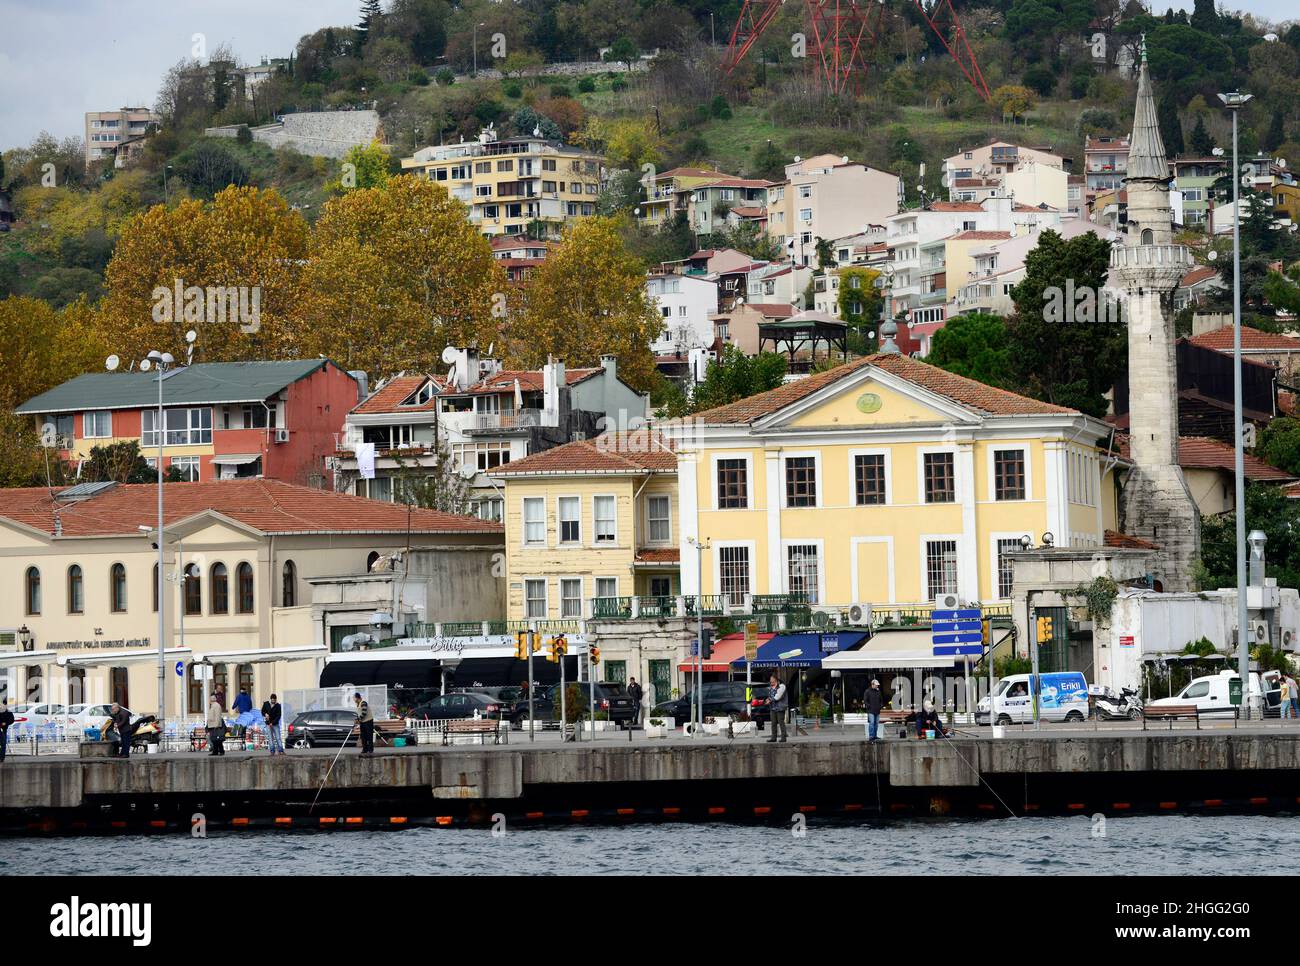 A view of Arnavutköy from the Bosphorus Strait in Istanbul, Turkey. Stock Photo